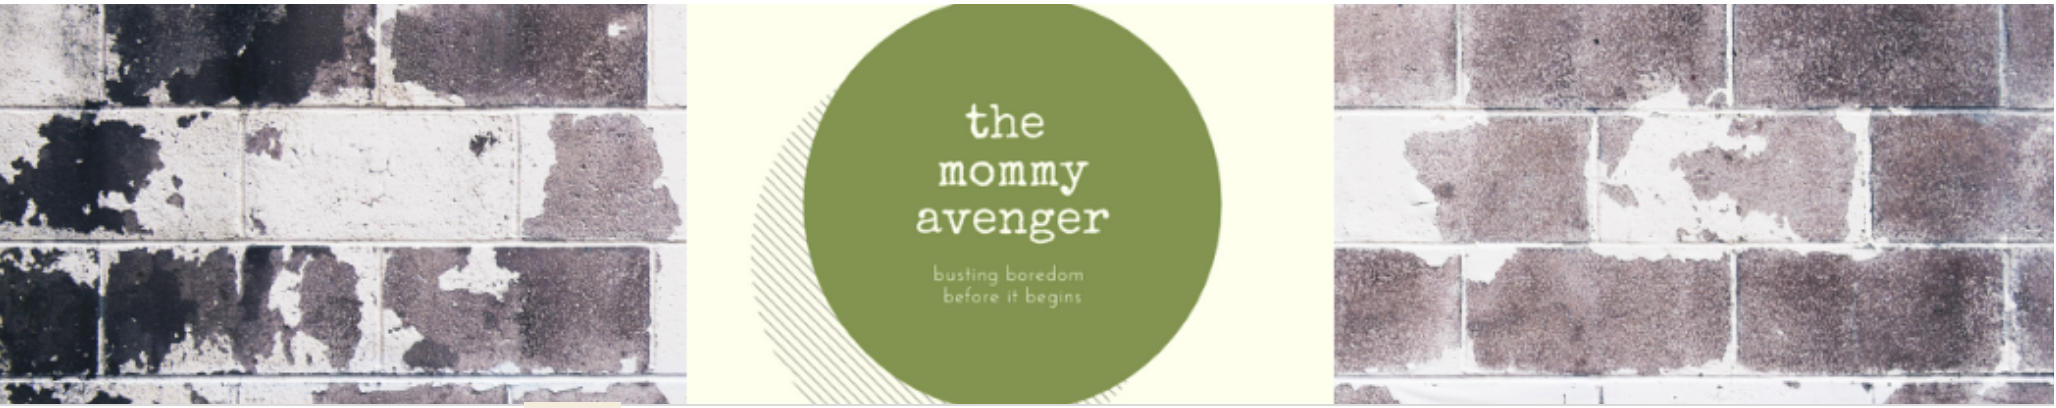 LÂMO FEATURED IN THE MOMMY AVENGER!